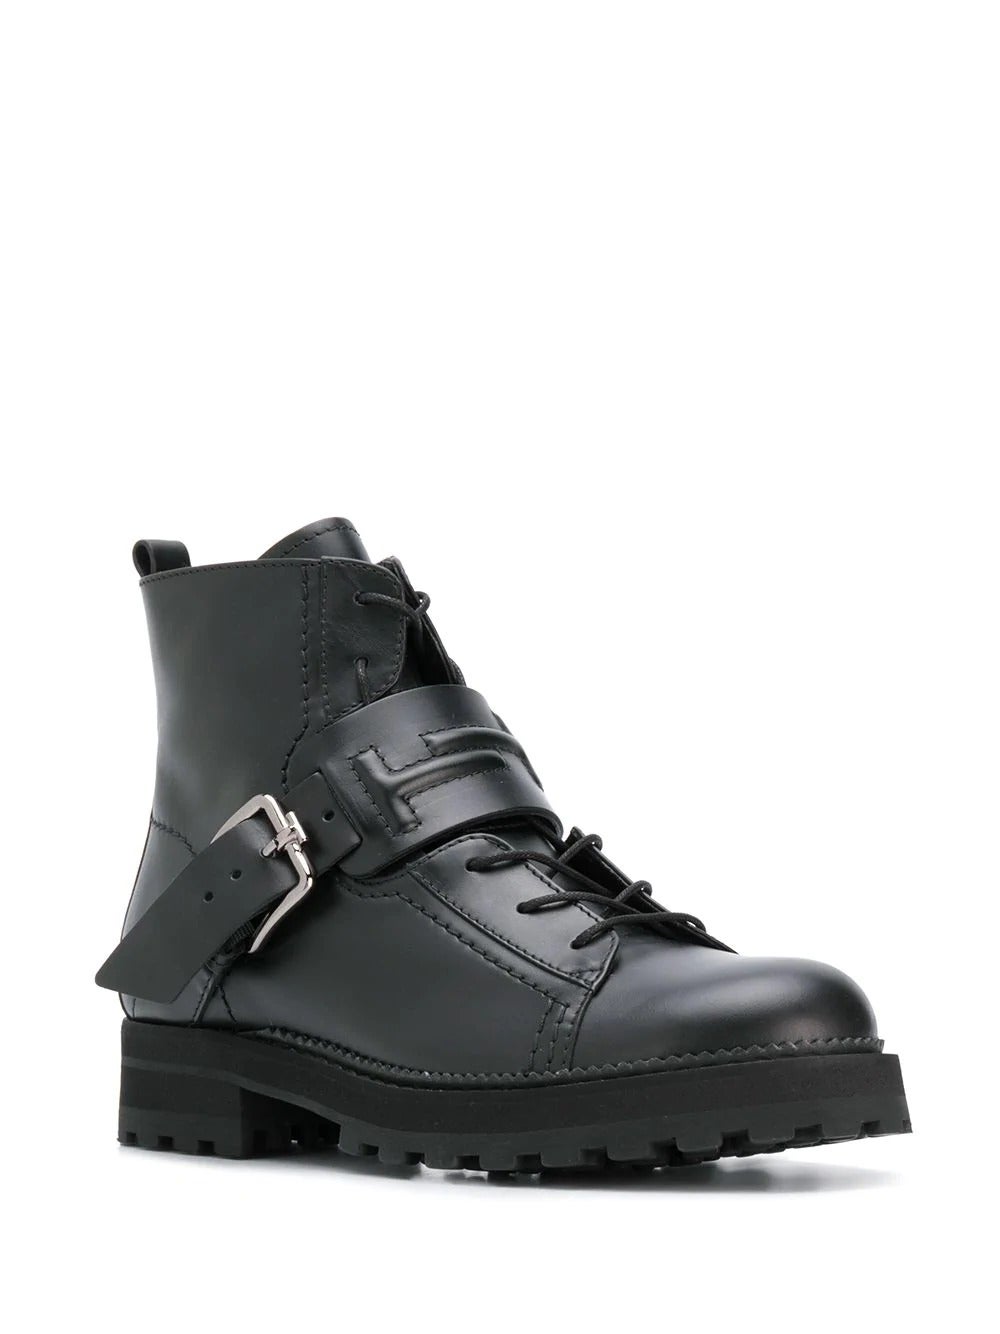 Tod’s + Buckled Strap Boots